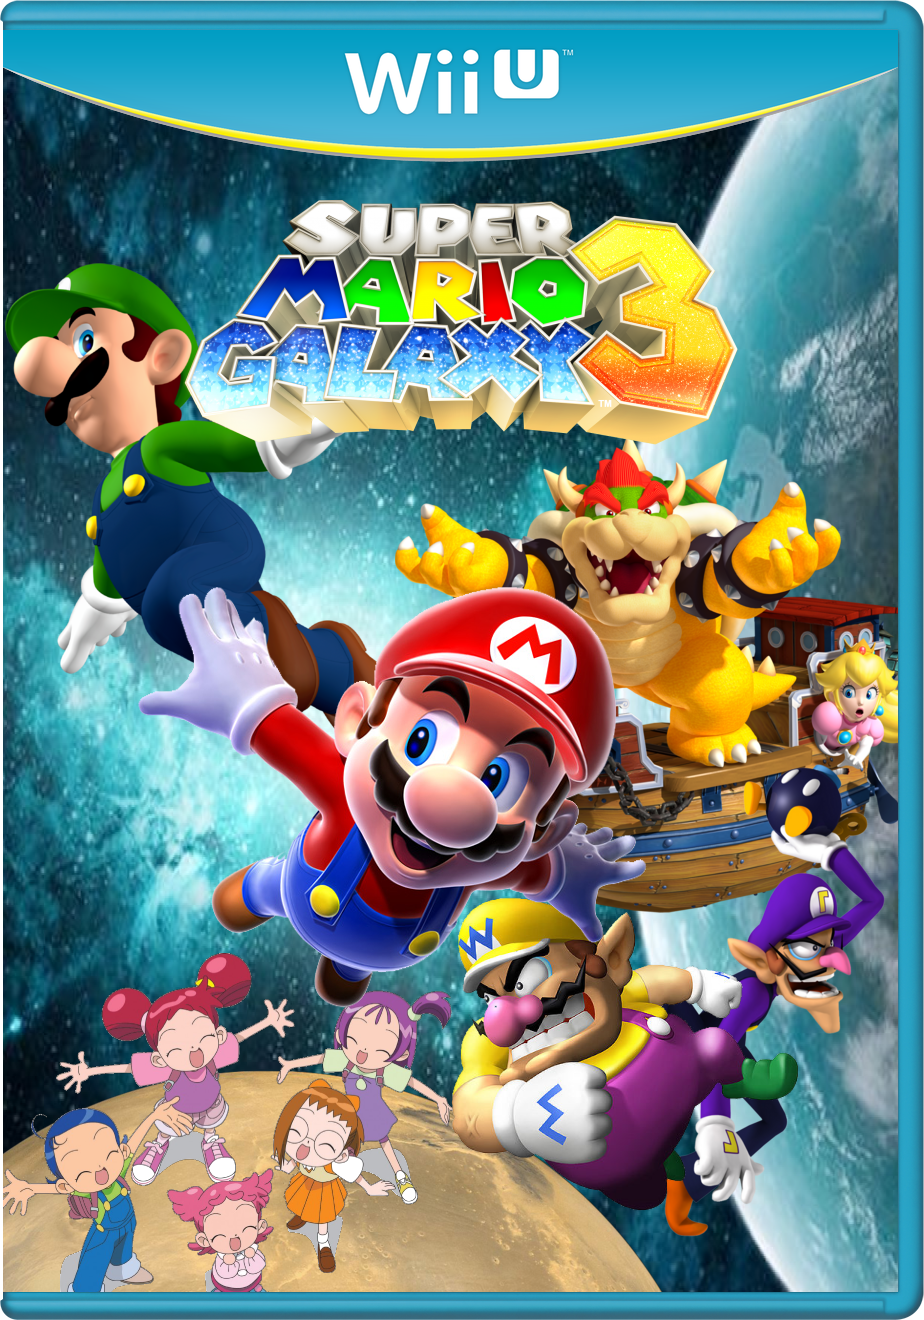 https://static.wikia.nocookie.net/gameideas/images/7/72/Super_Mario_Galaxy_3_Wii_U.png/revision/latest?cb=20140710213421